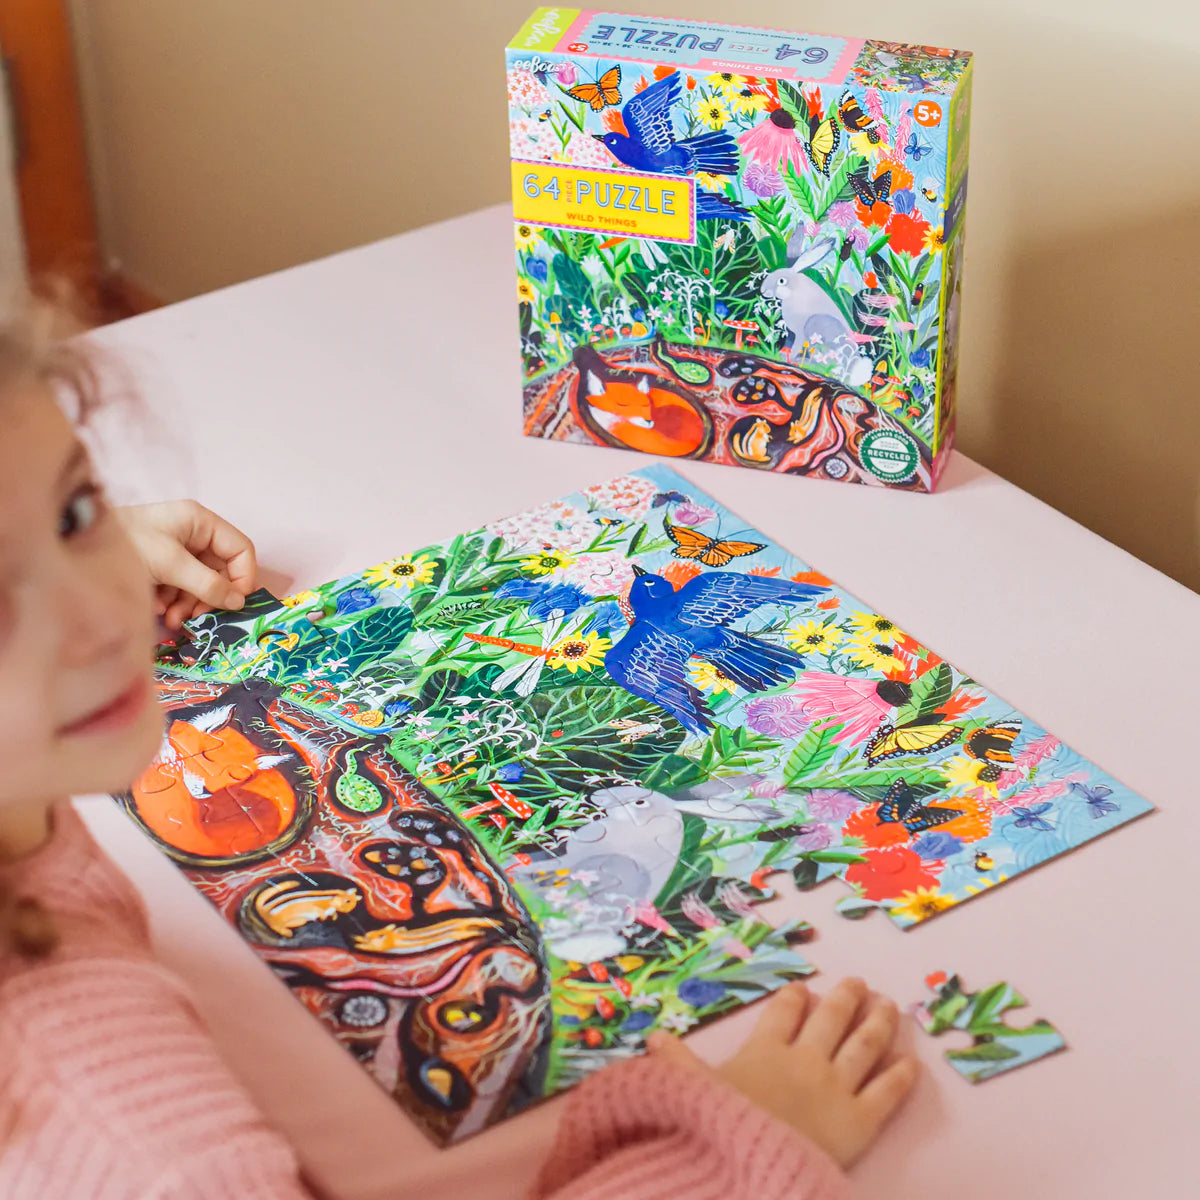 child building the Wild Things 64 piece puzzle at a table